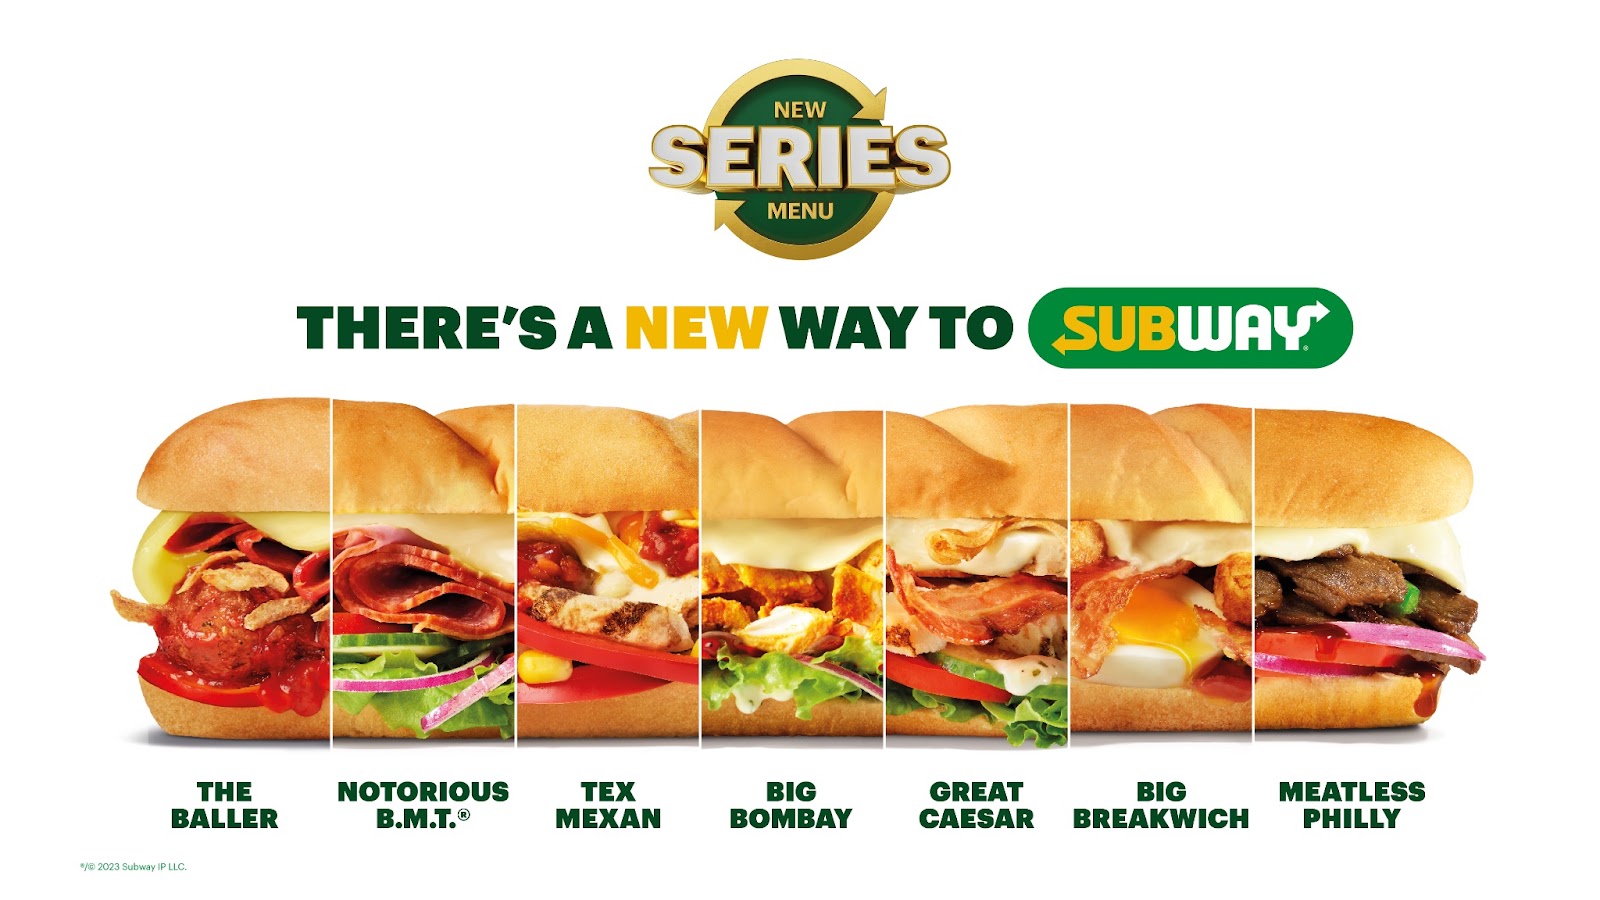 "There's a new way to Subway" campaign